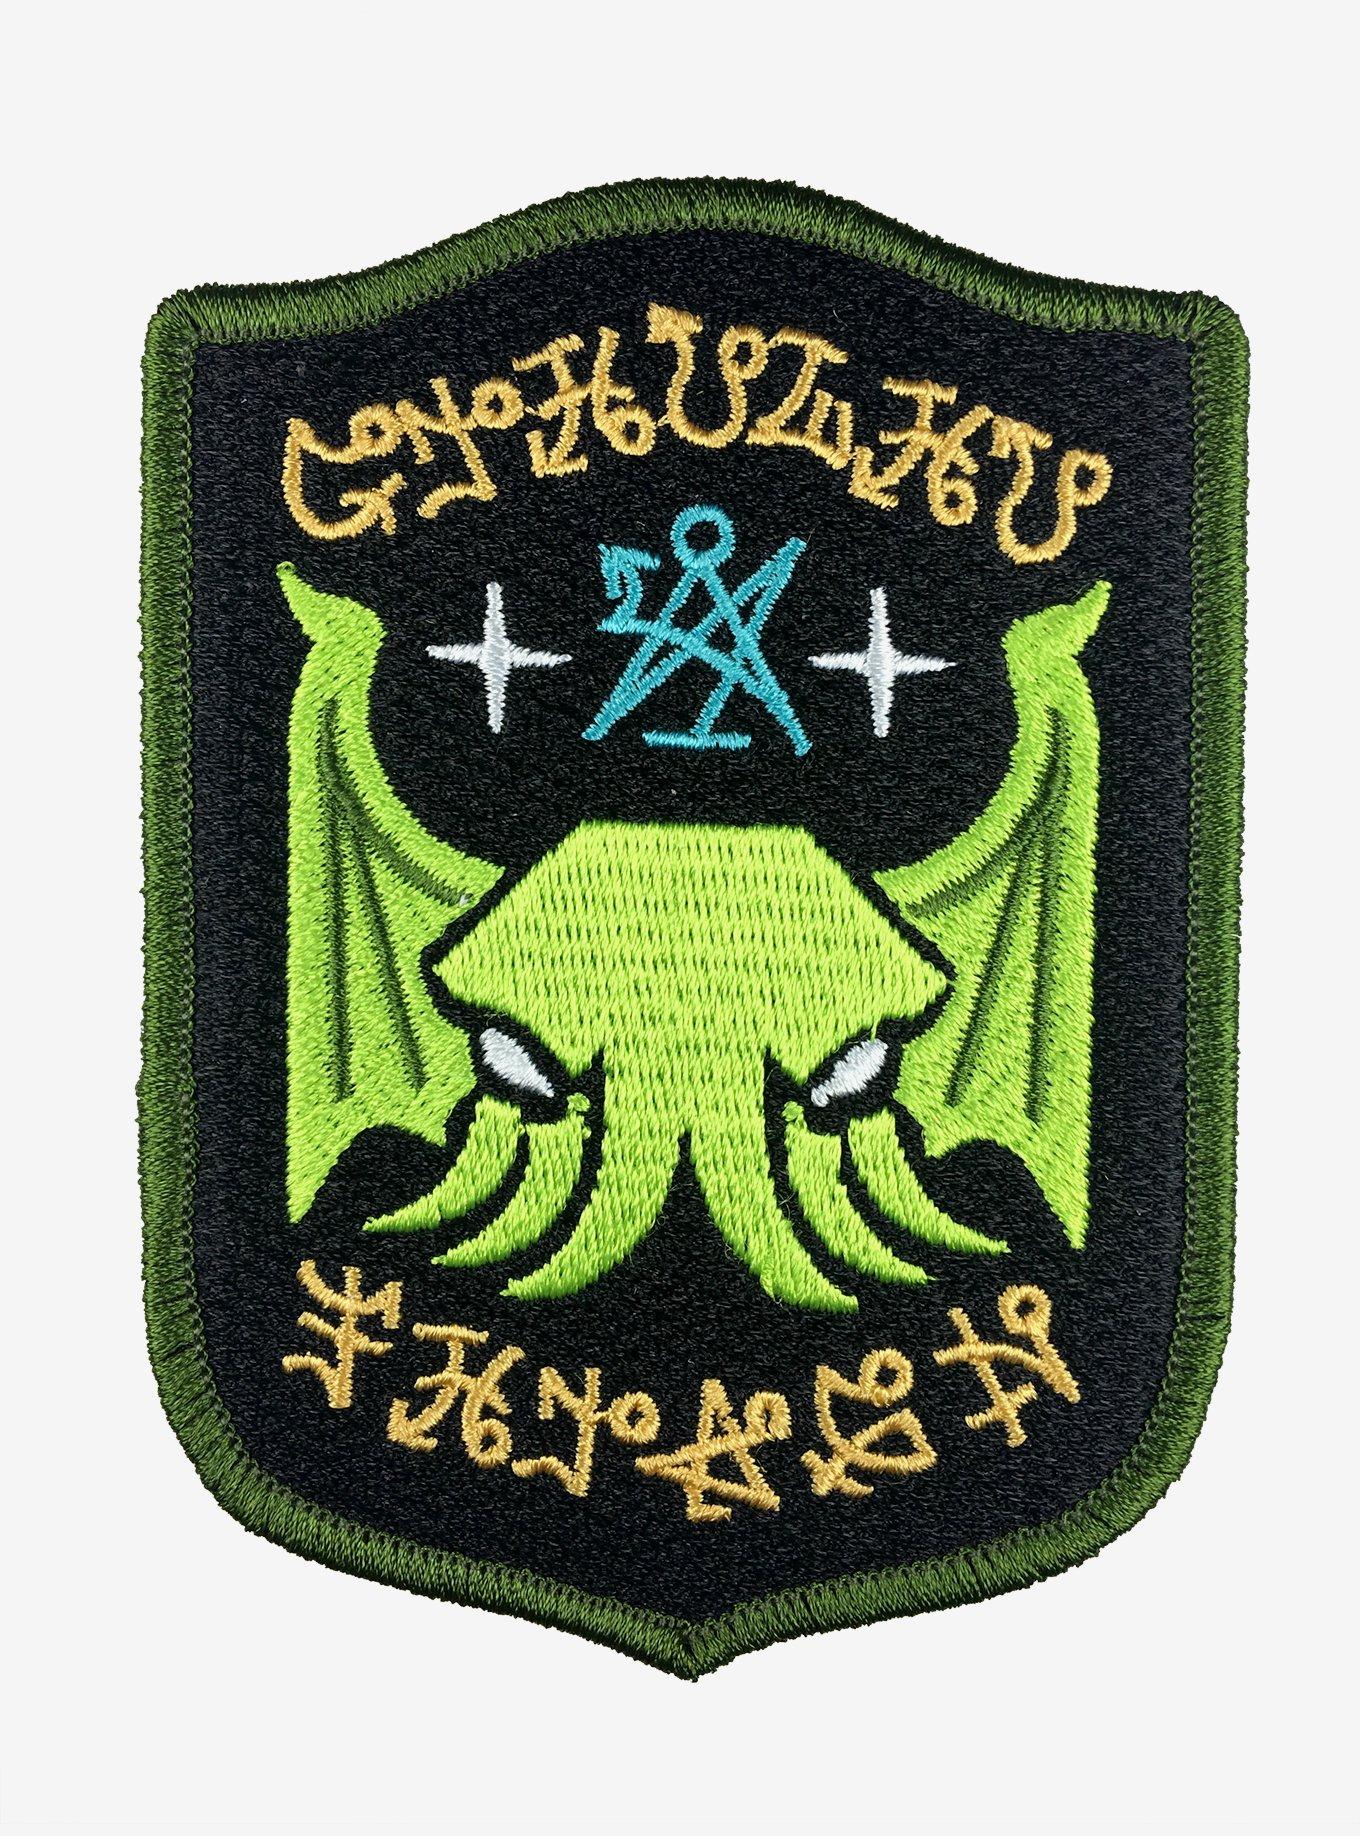 Monsterologist Cthulhu Fhtagn Patch, , hi-res